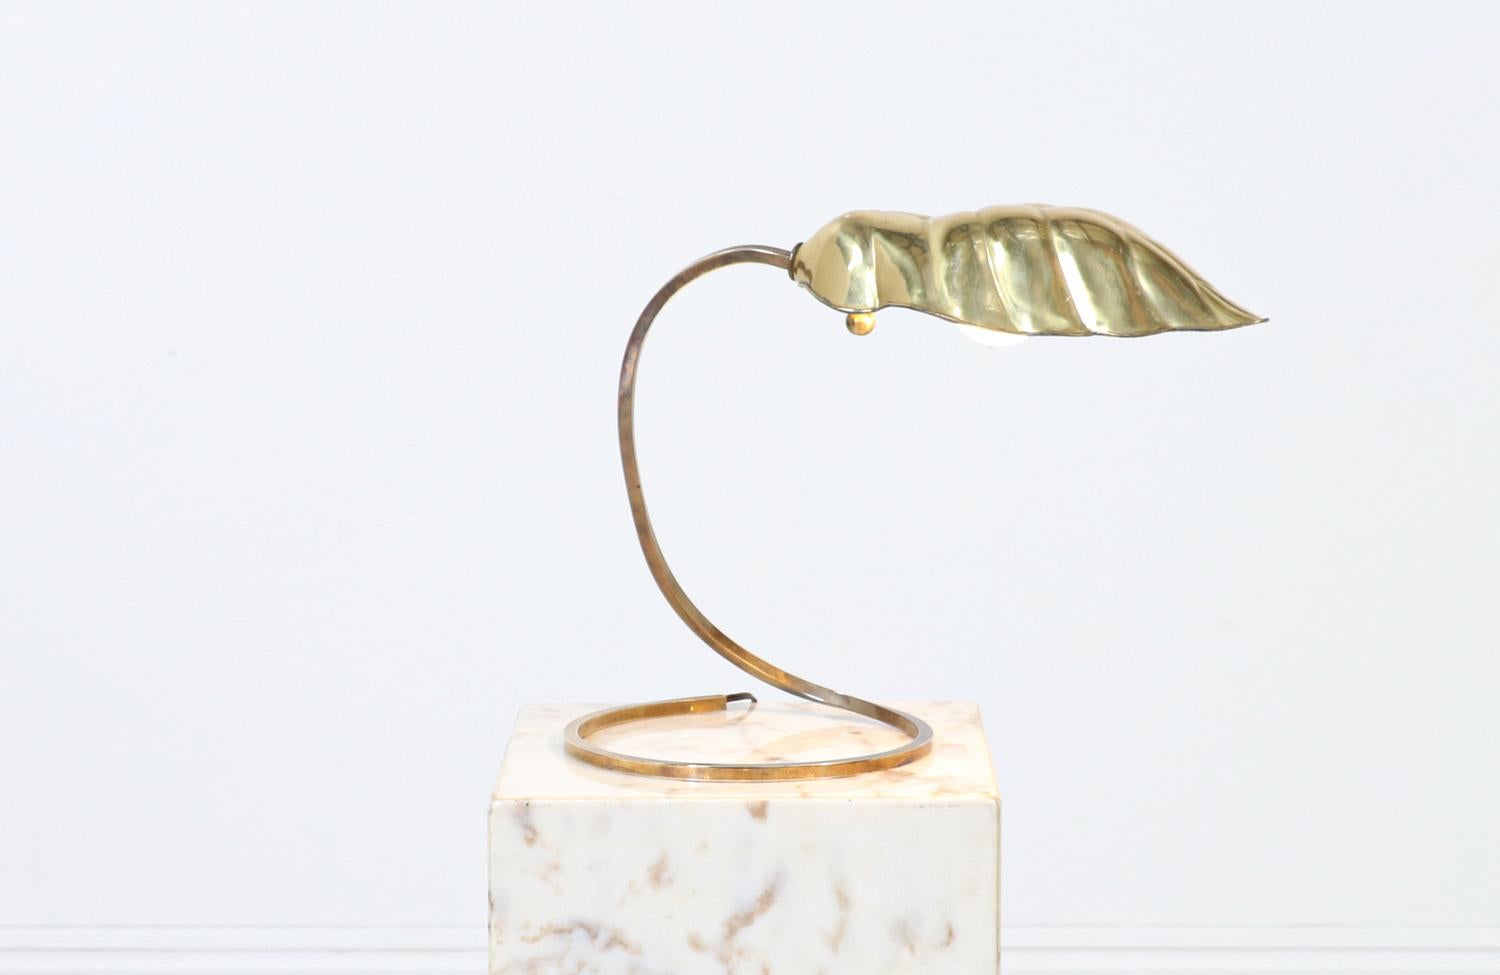 Mid-Century Modern brass leaf table lamp by Chapman.